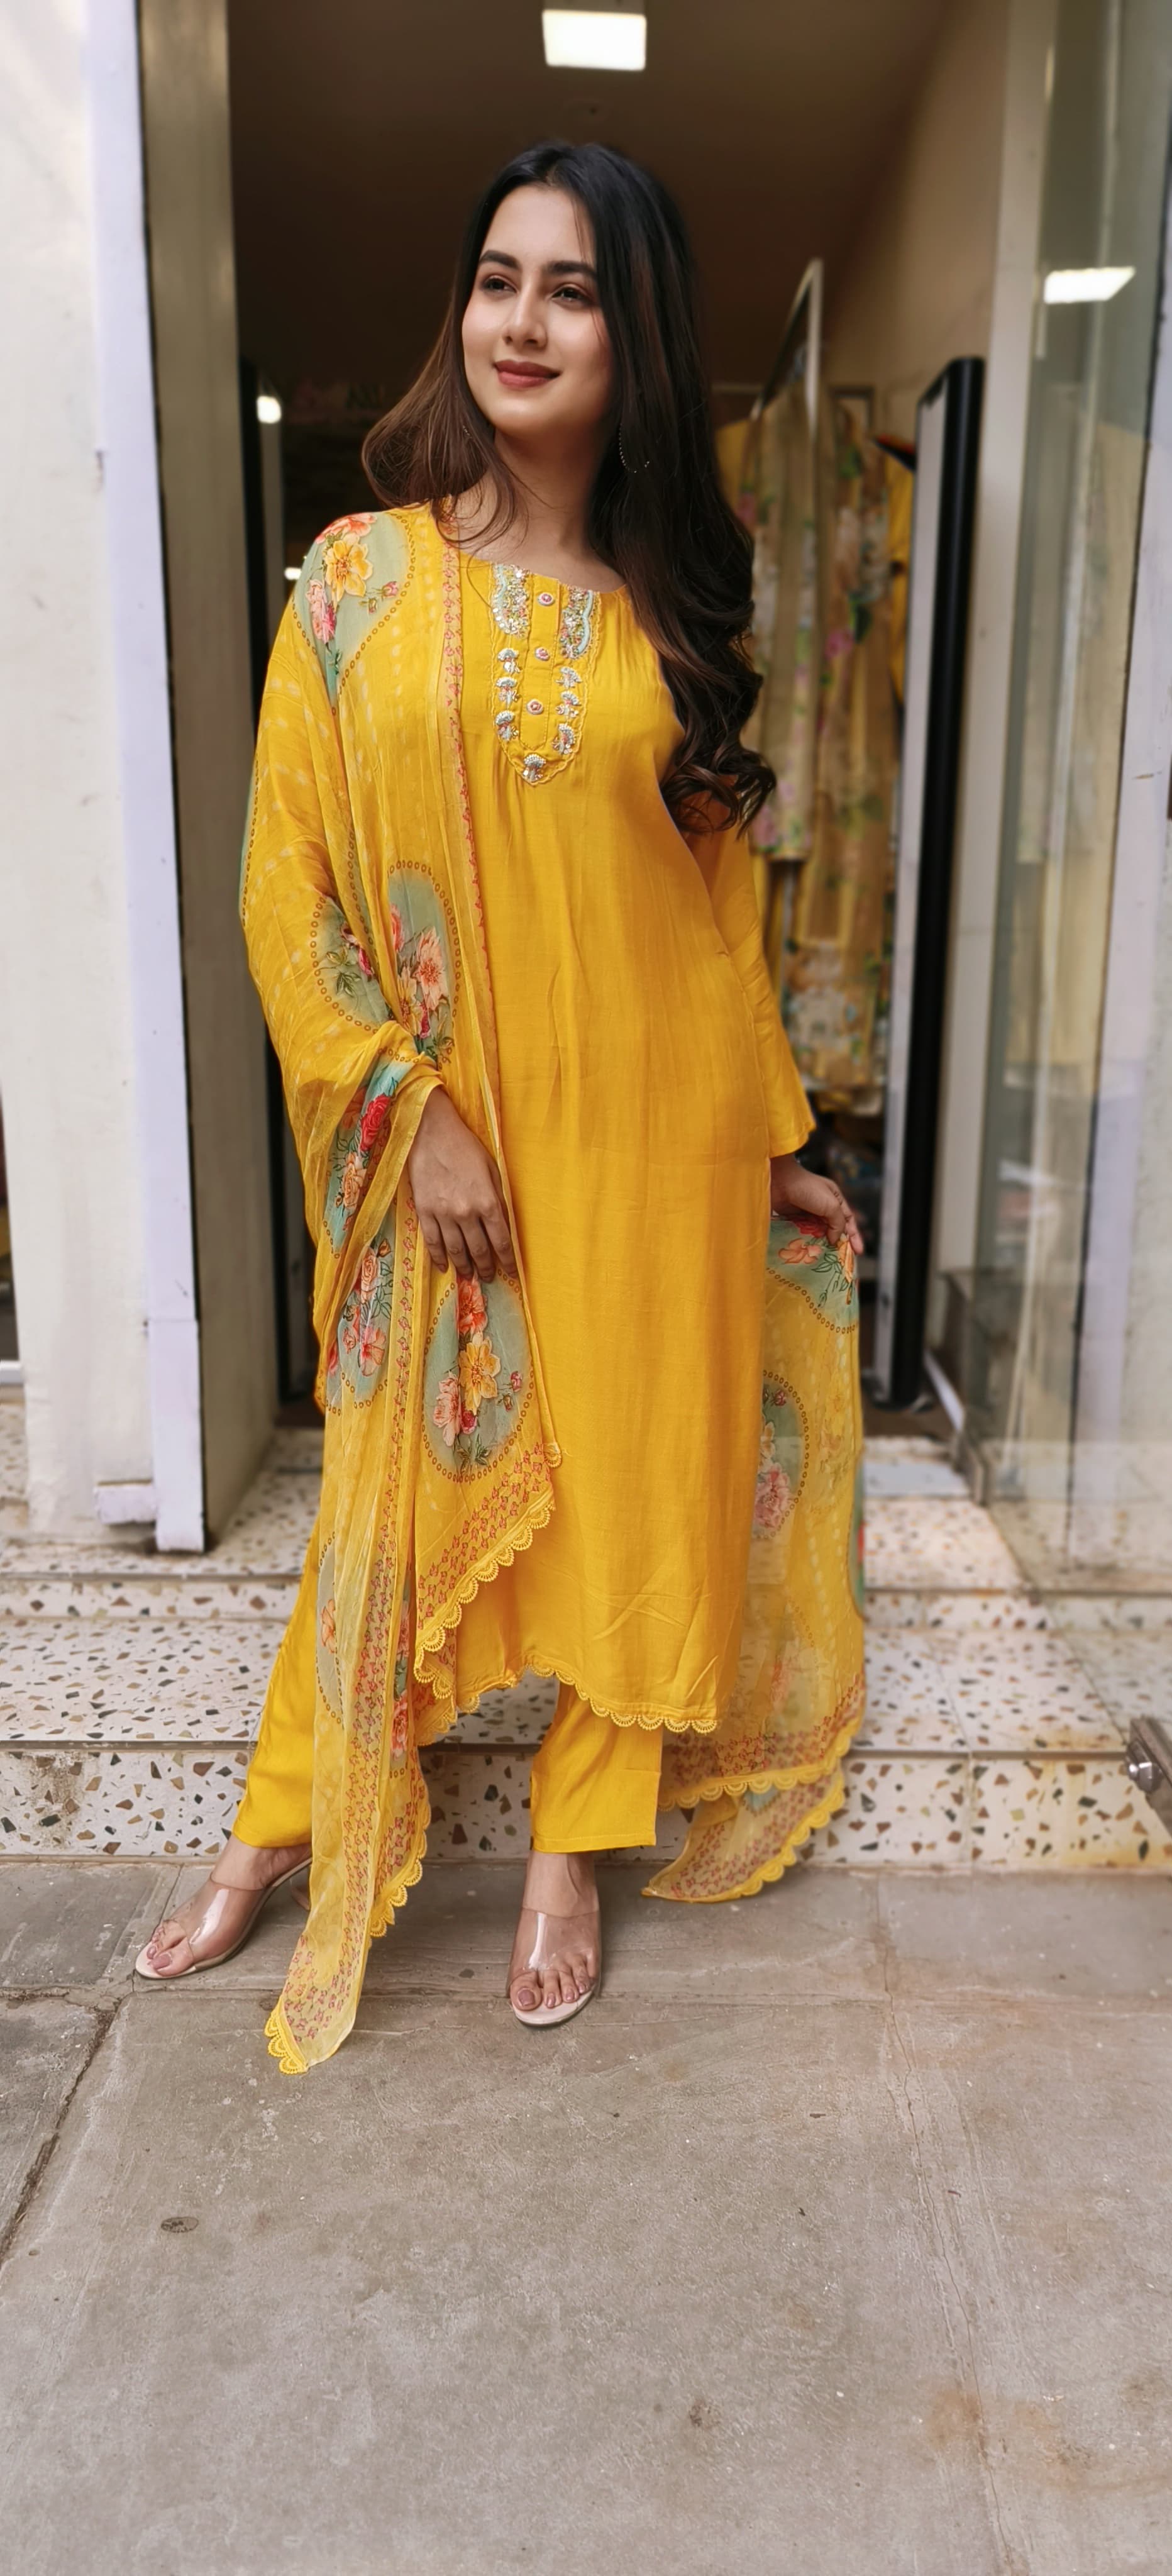 Embroidered Mango Yellow Muslin Full Suit Set With Floral Chiffon Dupatta-04498